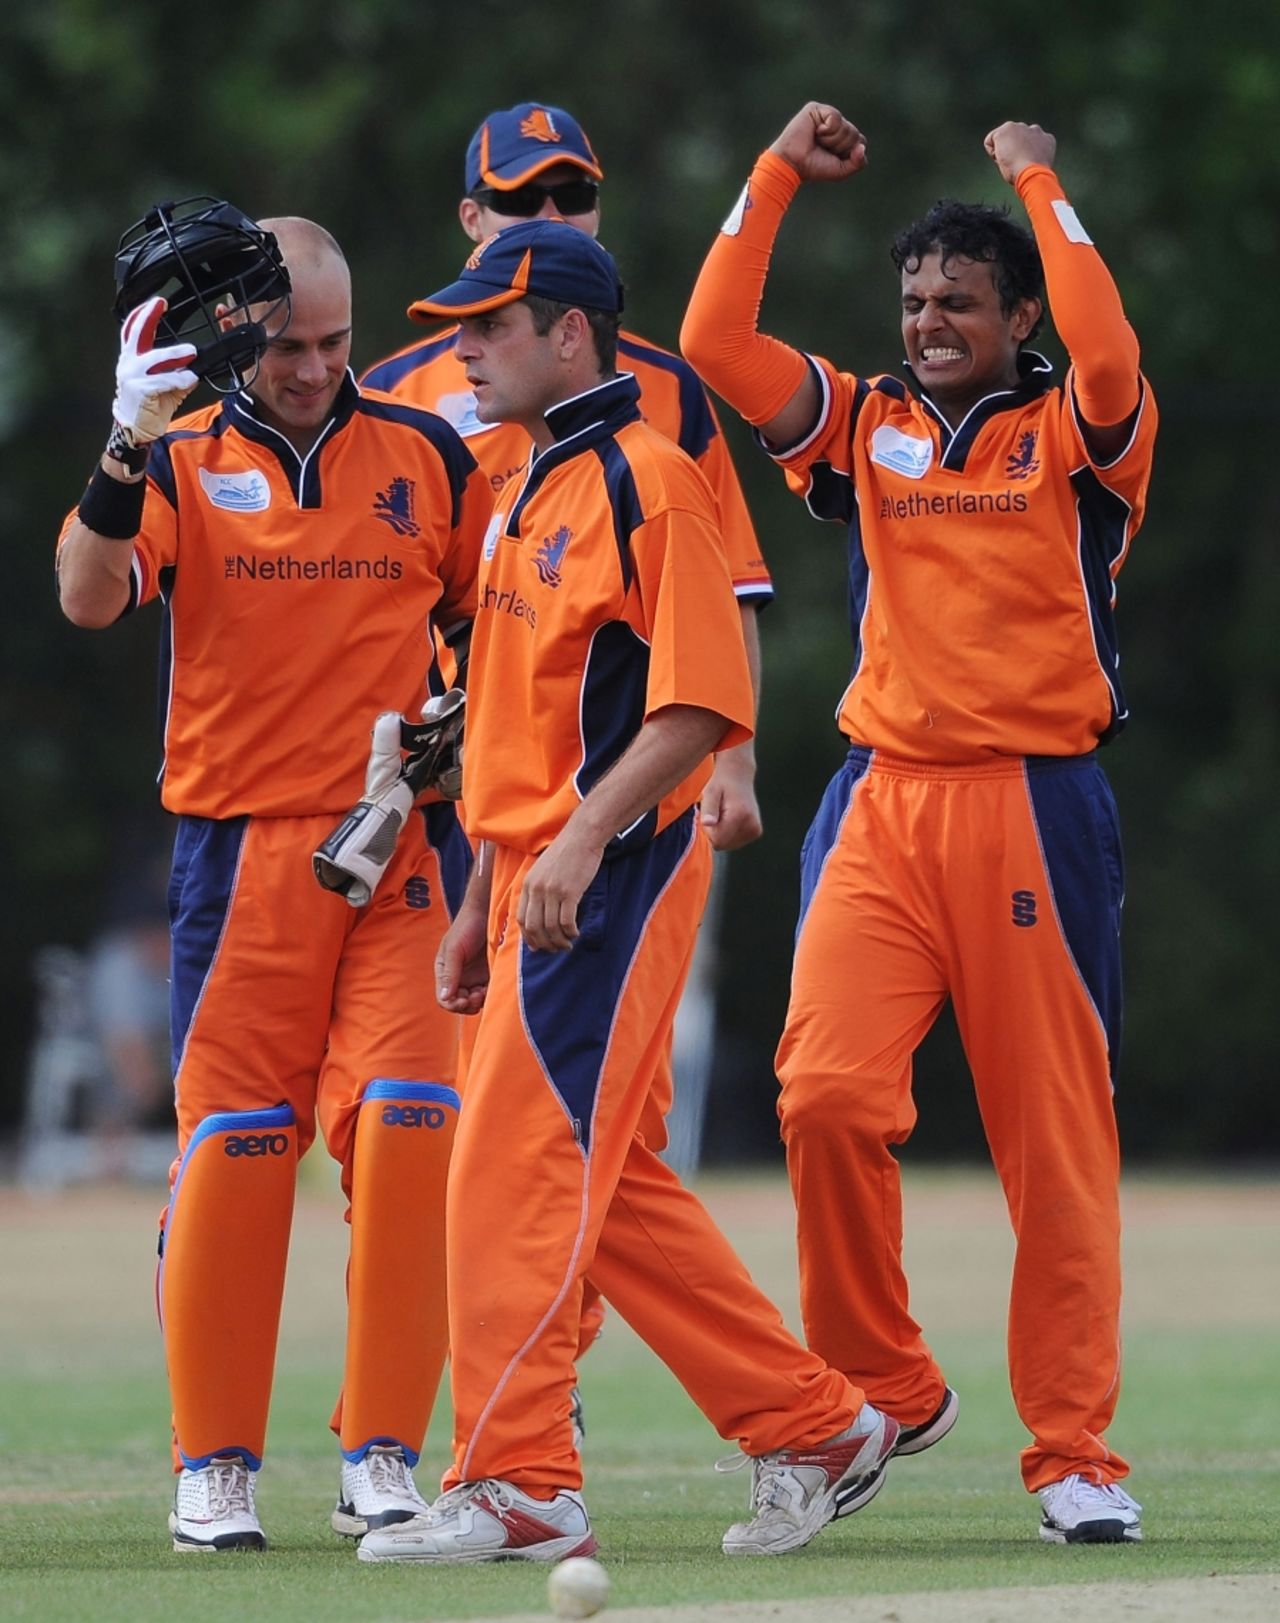 Adeel Raja celebrates one of his two wickets against Canada, Netherlands v Canada, ICC WCL Division 1, Rotterdam, July 5 2010